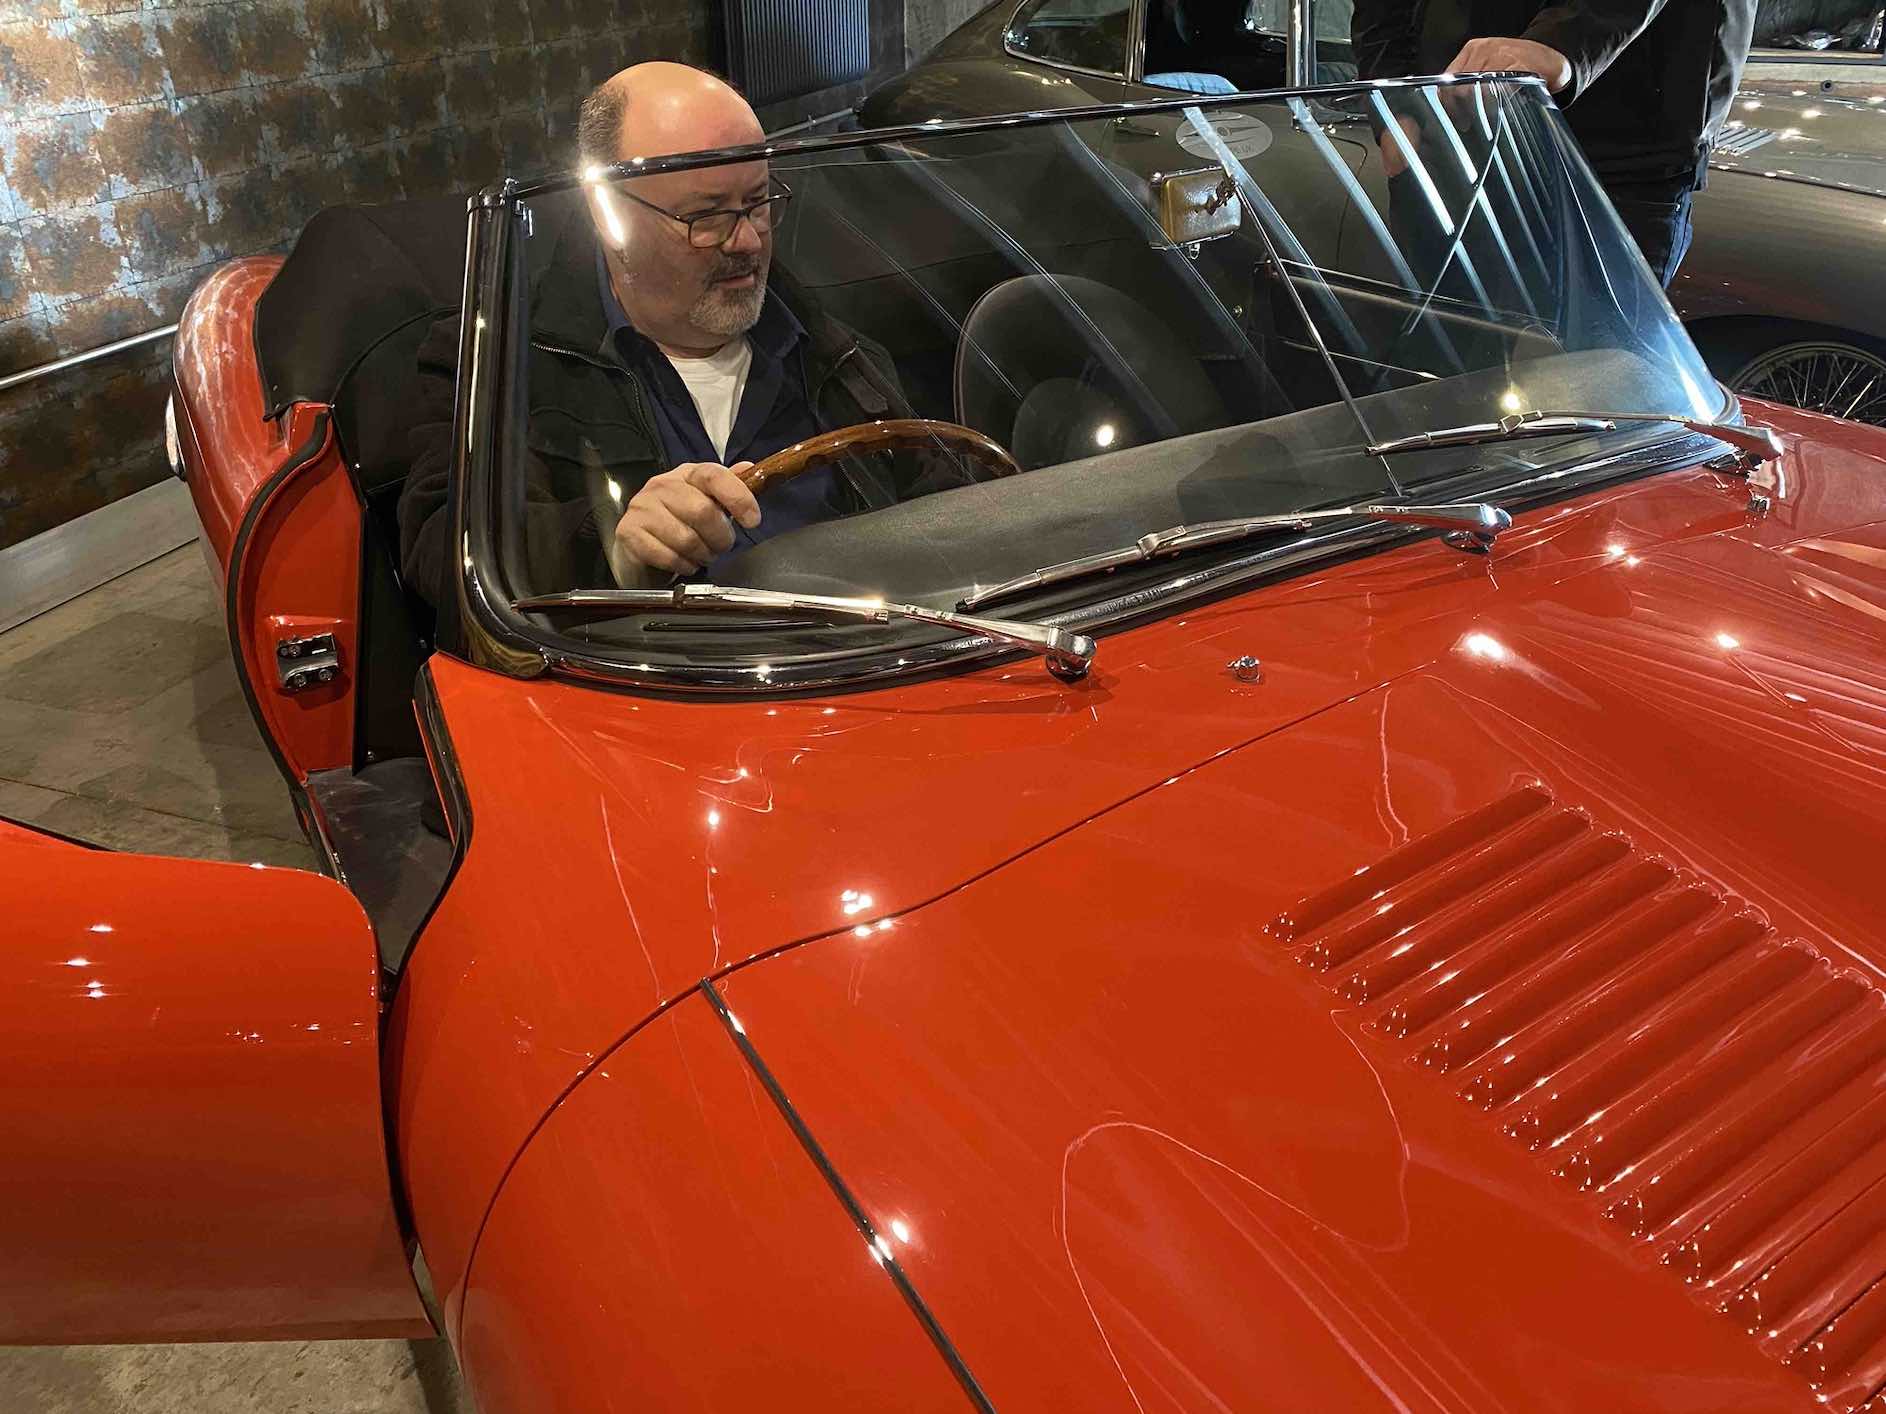 Author TNA Howe in the seat of a classic Jaguar E-Type